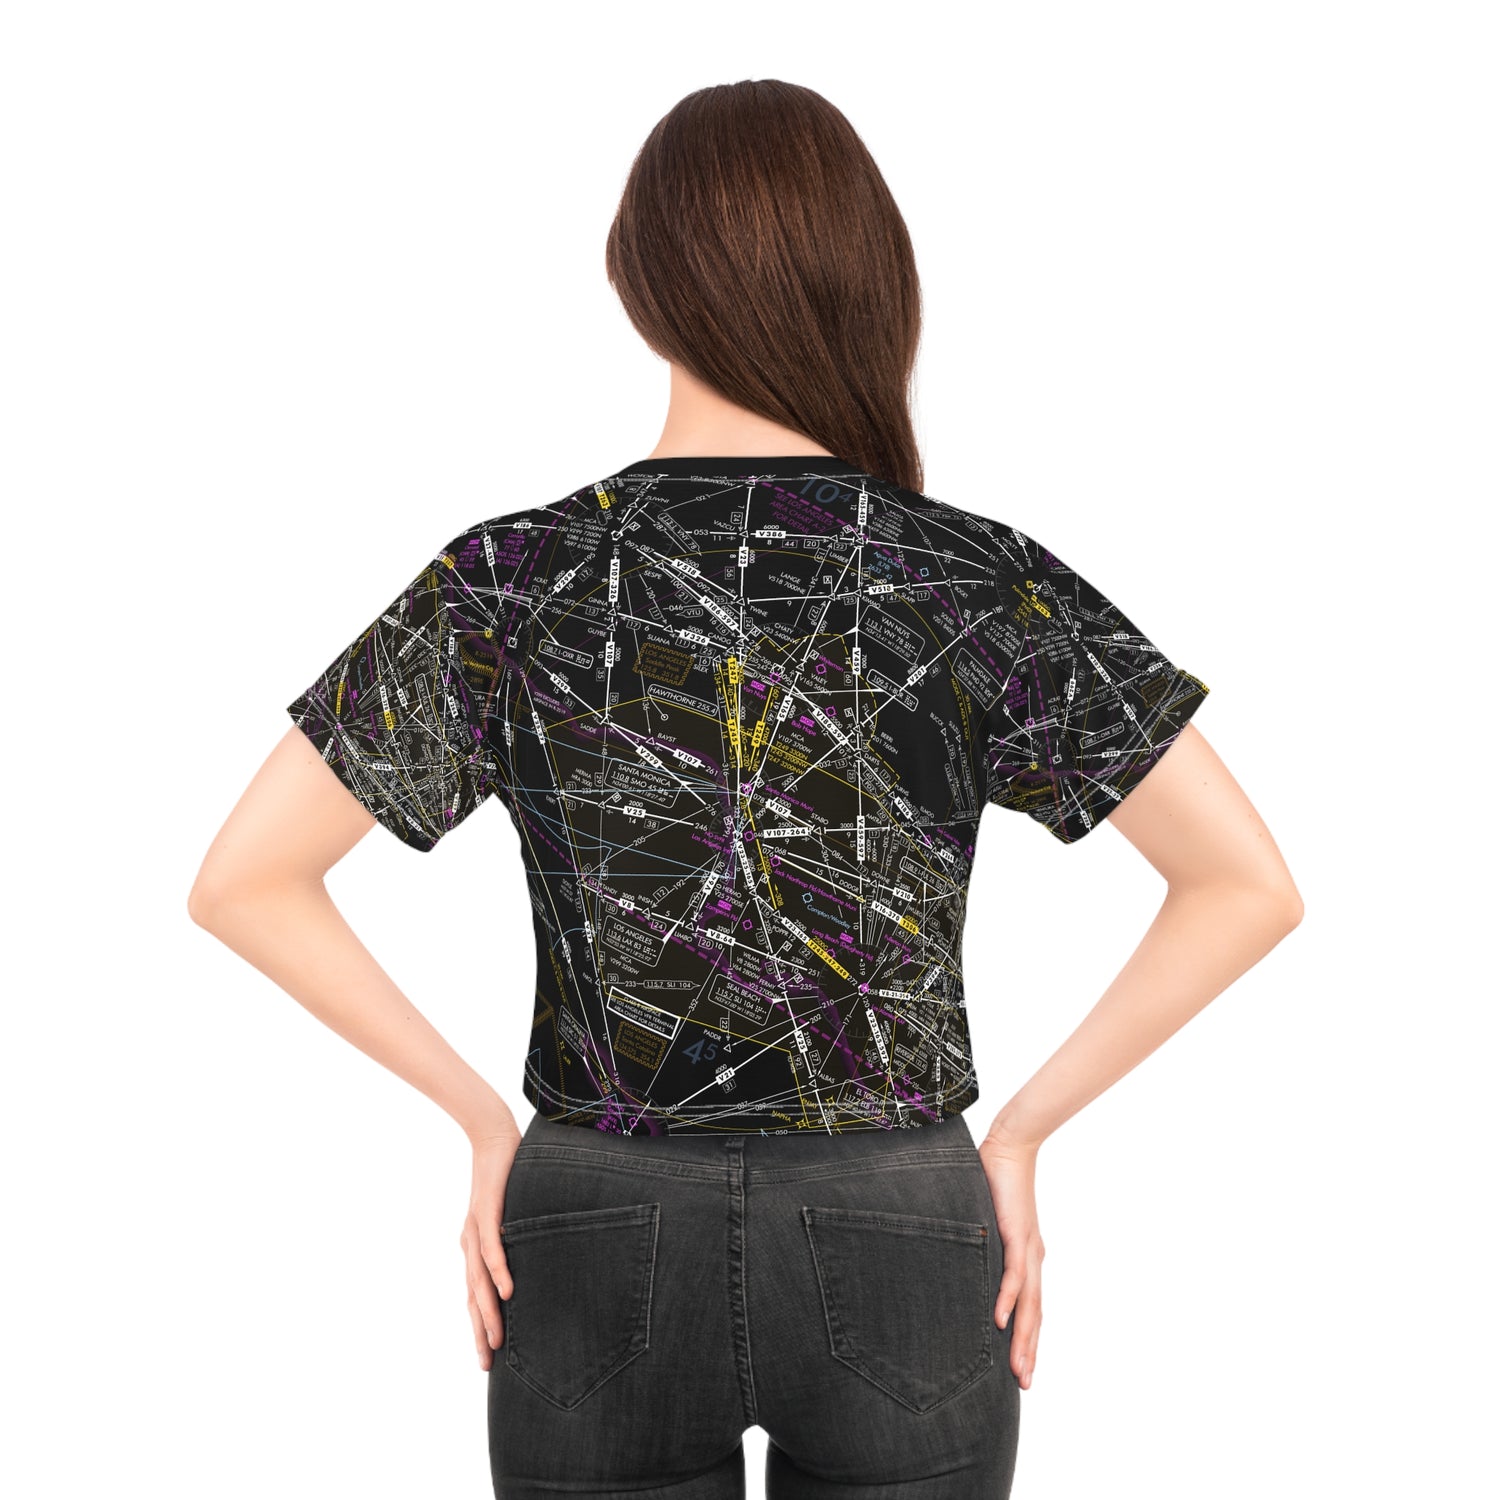 LAX Enroute Low Altitude Chart (invert) crop tee